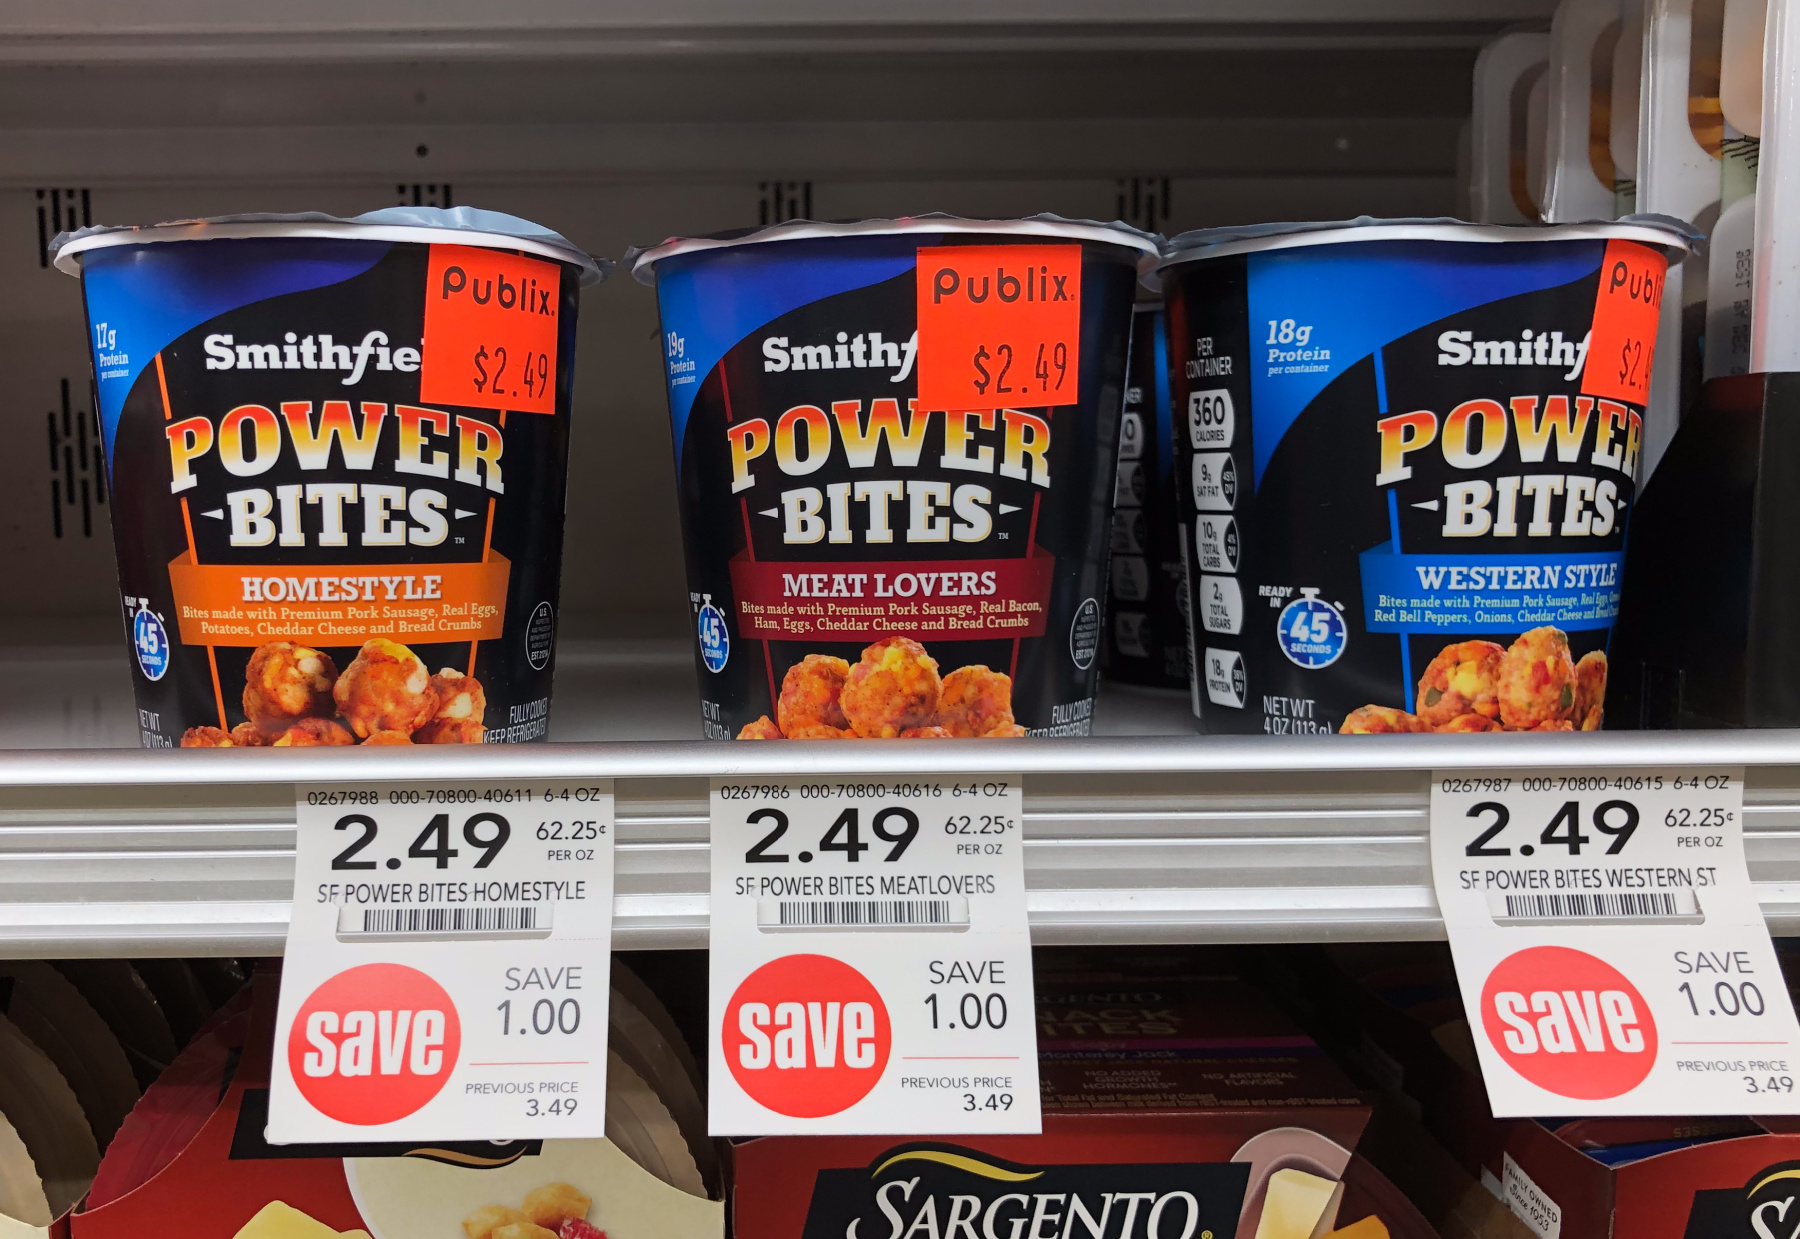 Fantastic Deal On Smithfield Power Bites With The Sale And Coupon Combo - Just $2 At Publix on I Heart Publix 1